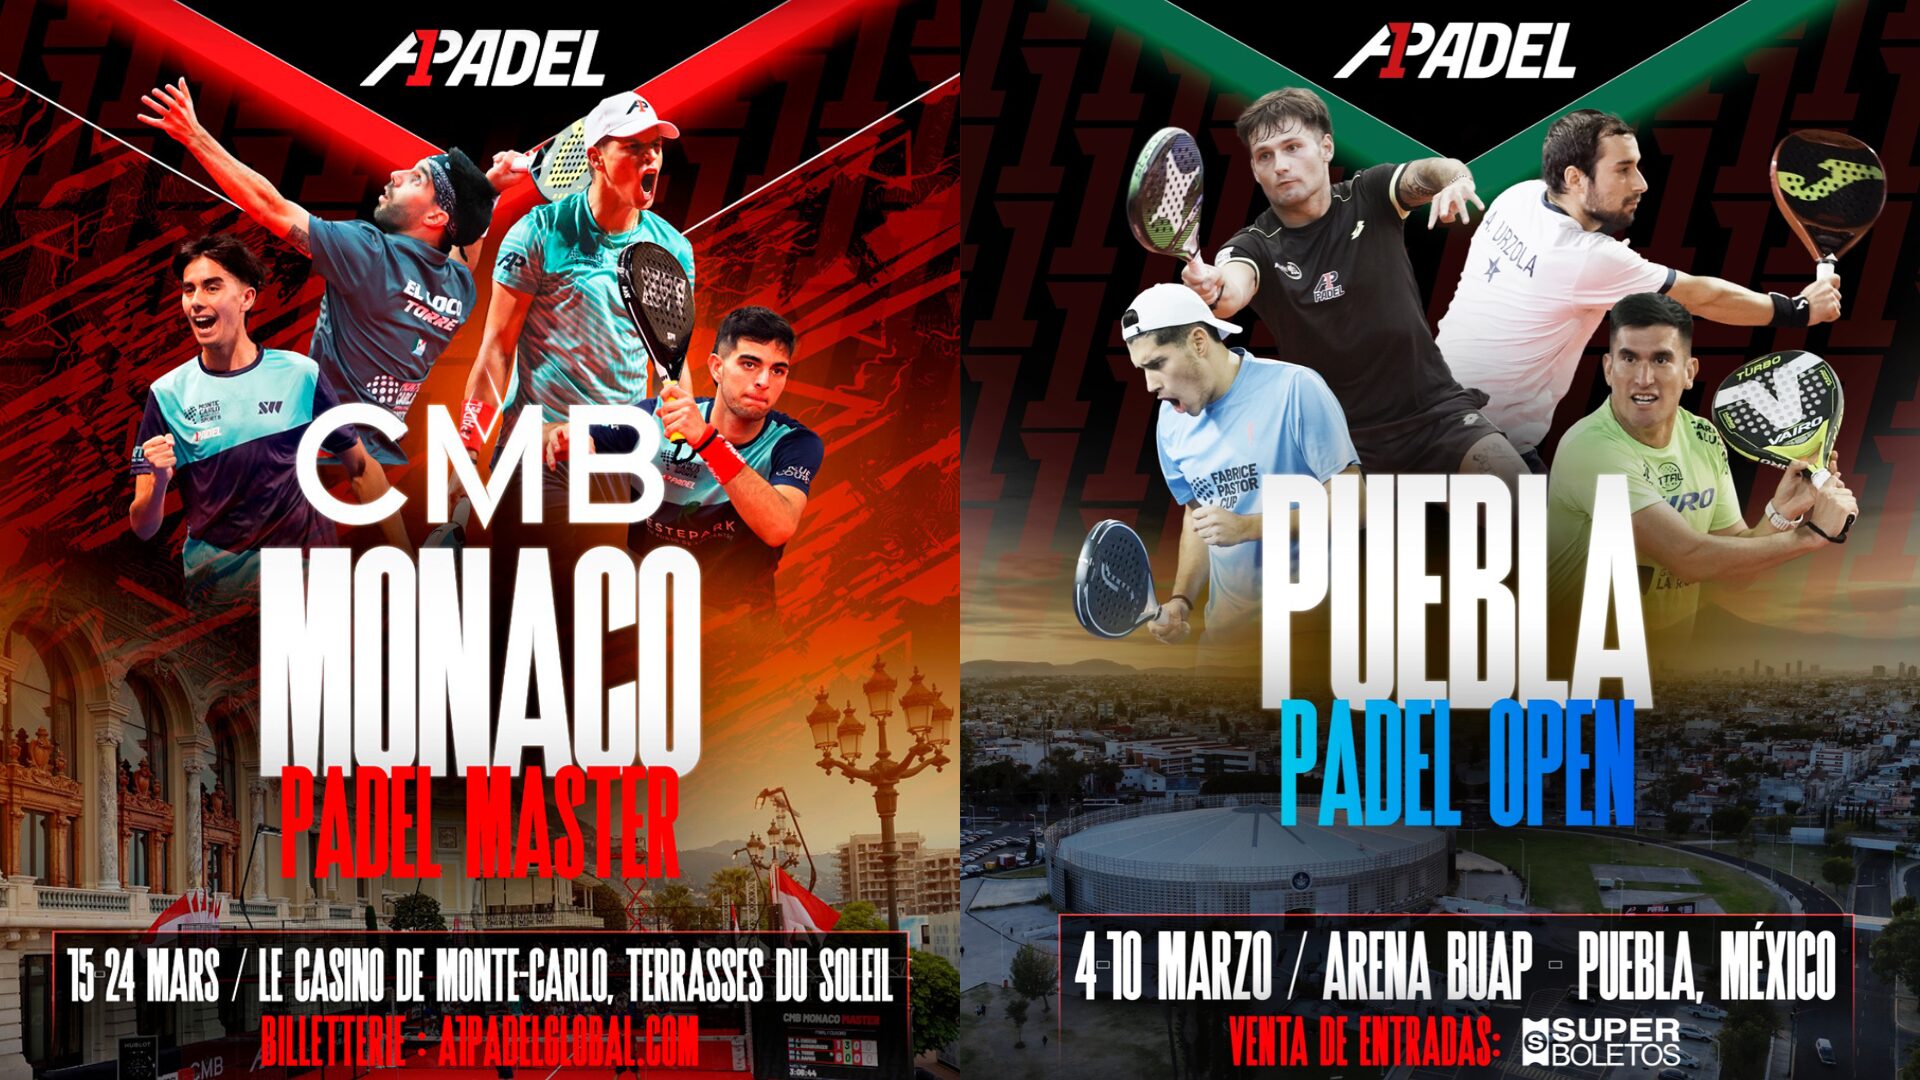 A1 Padel – Discover those registered for the Puebla and Monaco tournaments